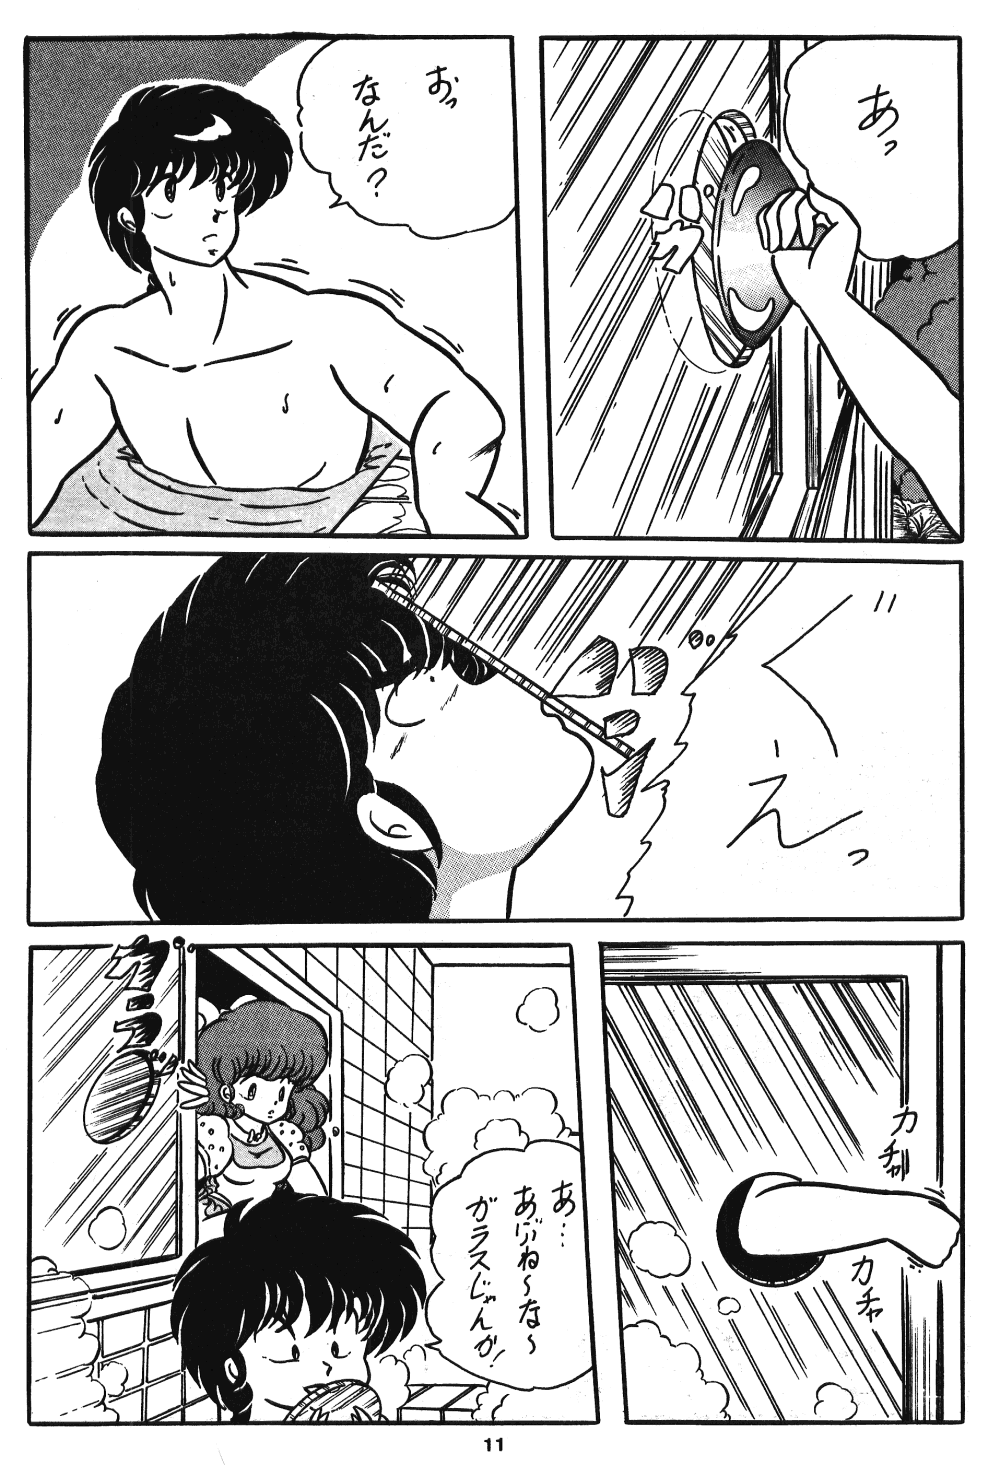 [C-COMPANY] C-COMPANY SPECIAL STAGE 2 (Ranma 1/2) page 12 full